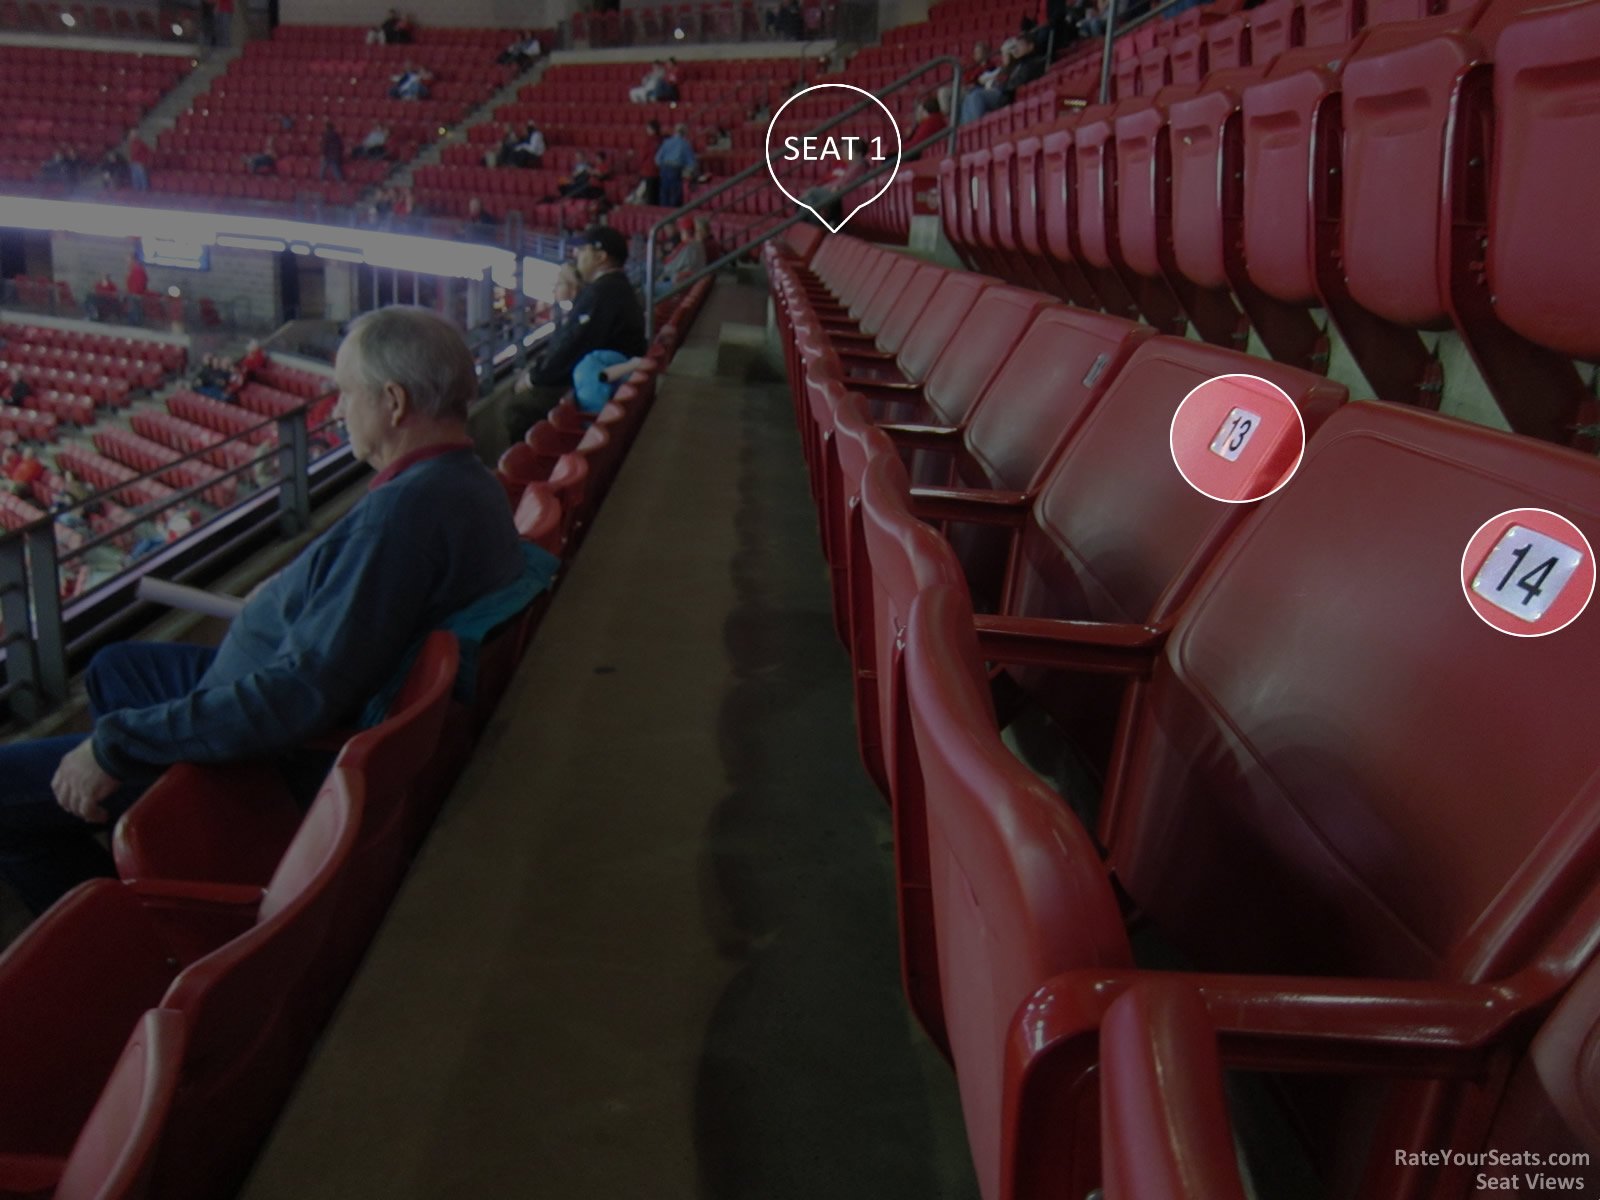 Seating progression at the Kohl Center